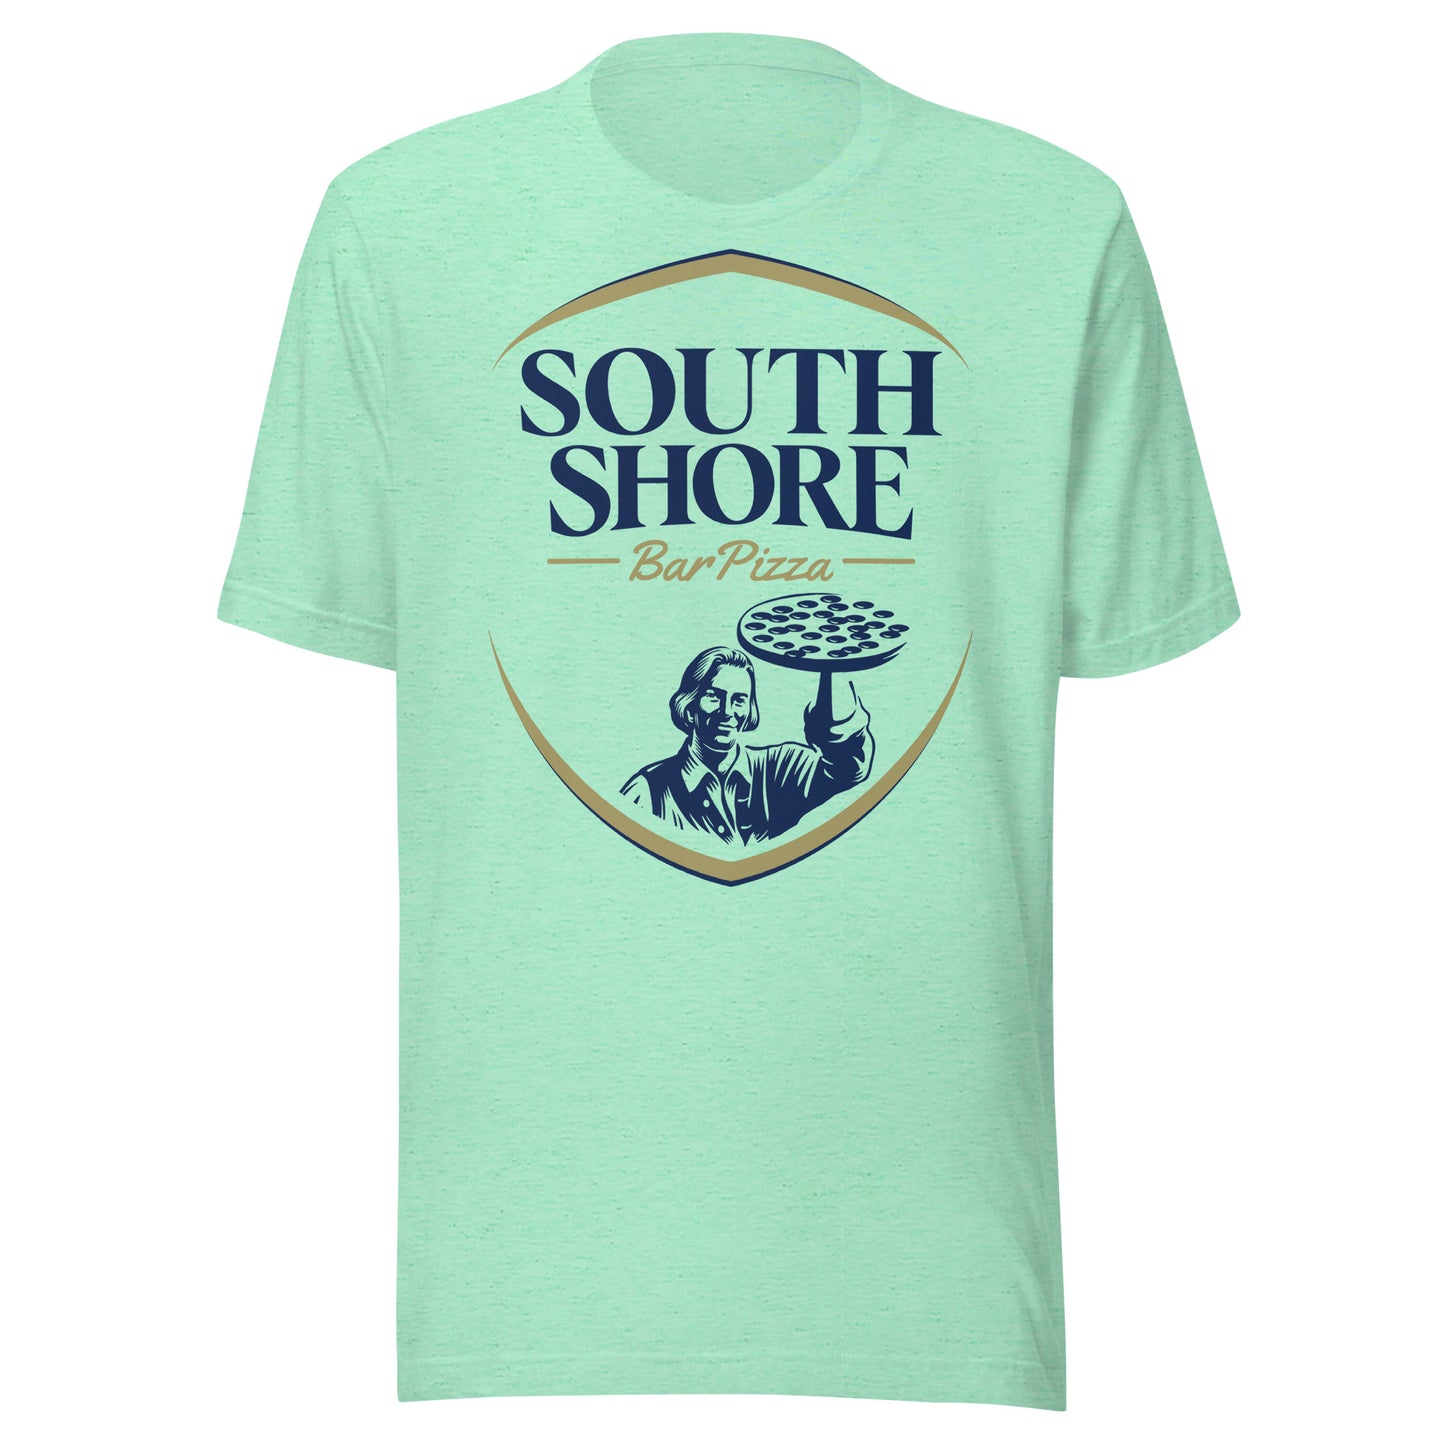 South Shore Bar Pizza - Founding Fathers Boston Tee